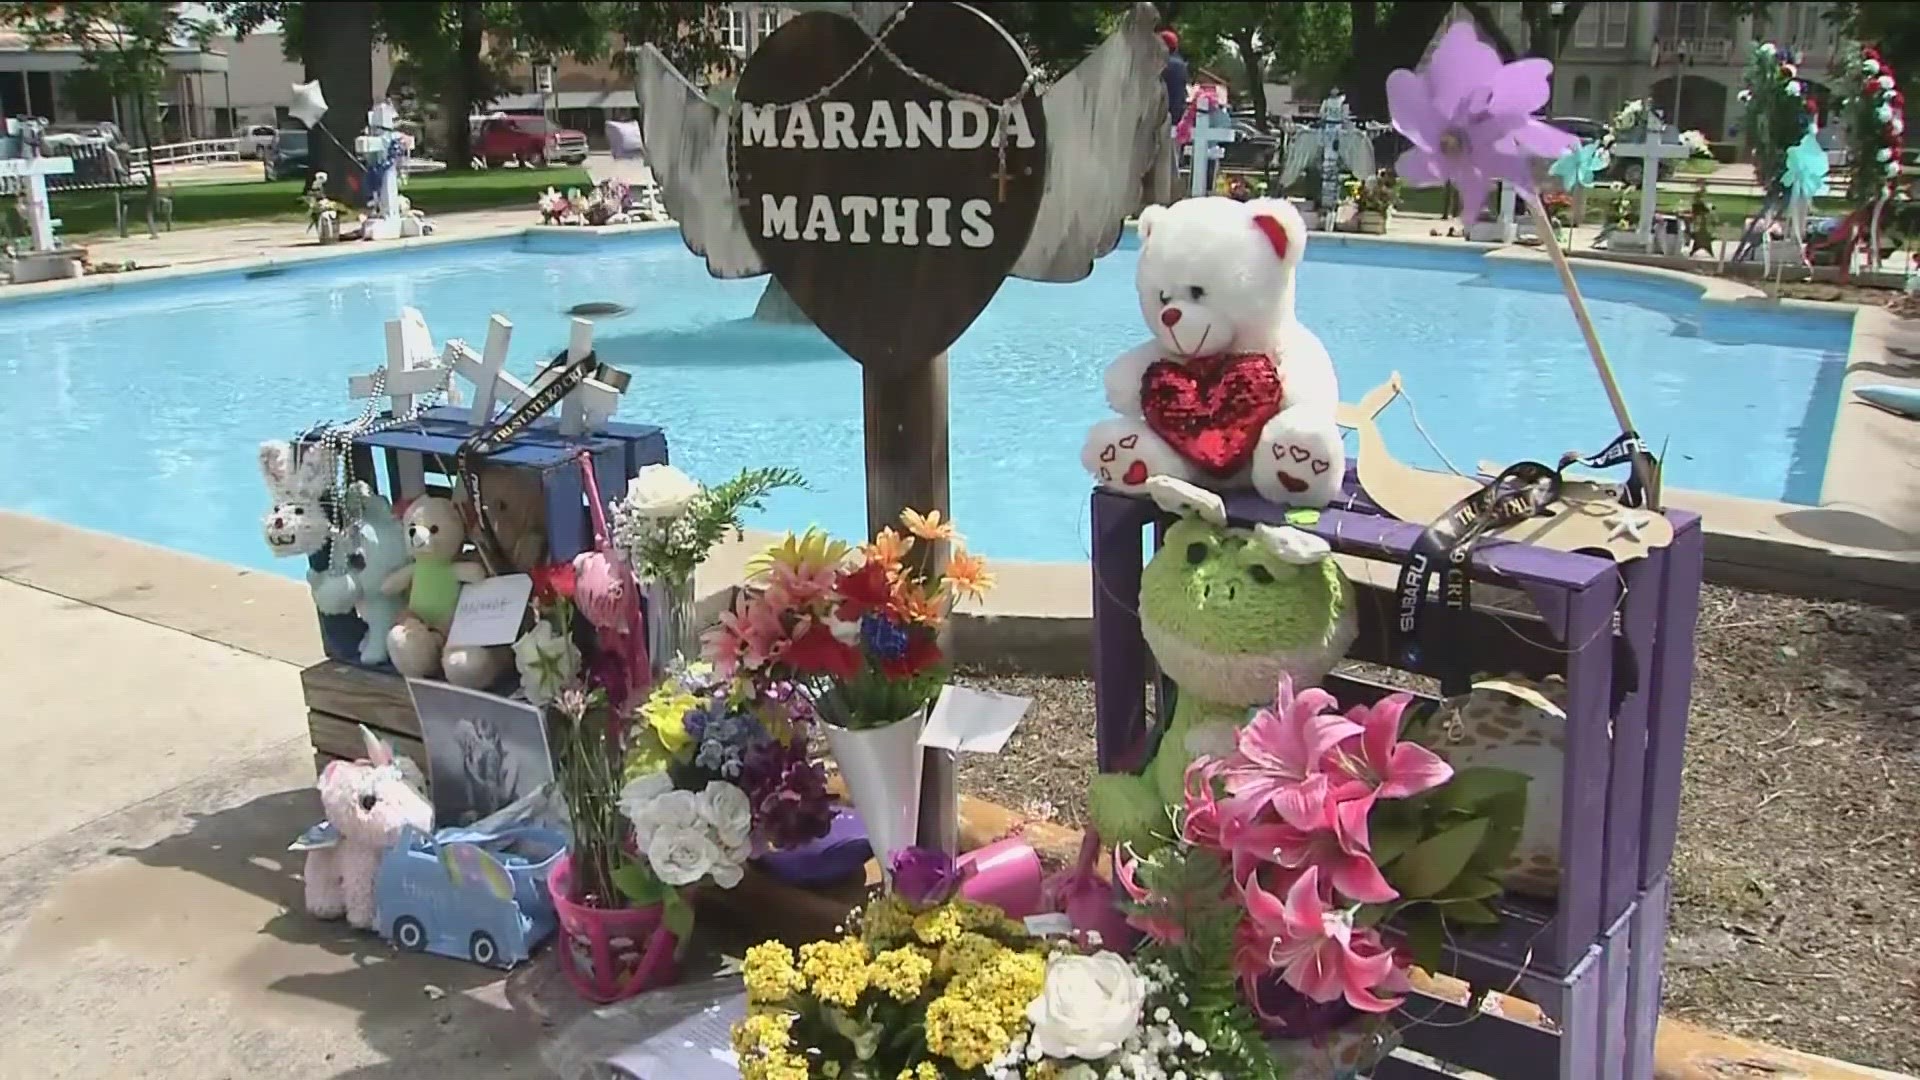 The relatives of 19 students and two teachers gunned down at an elementary school in Uvalde, Texas, are still waiting for answers a year later.